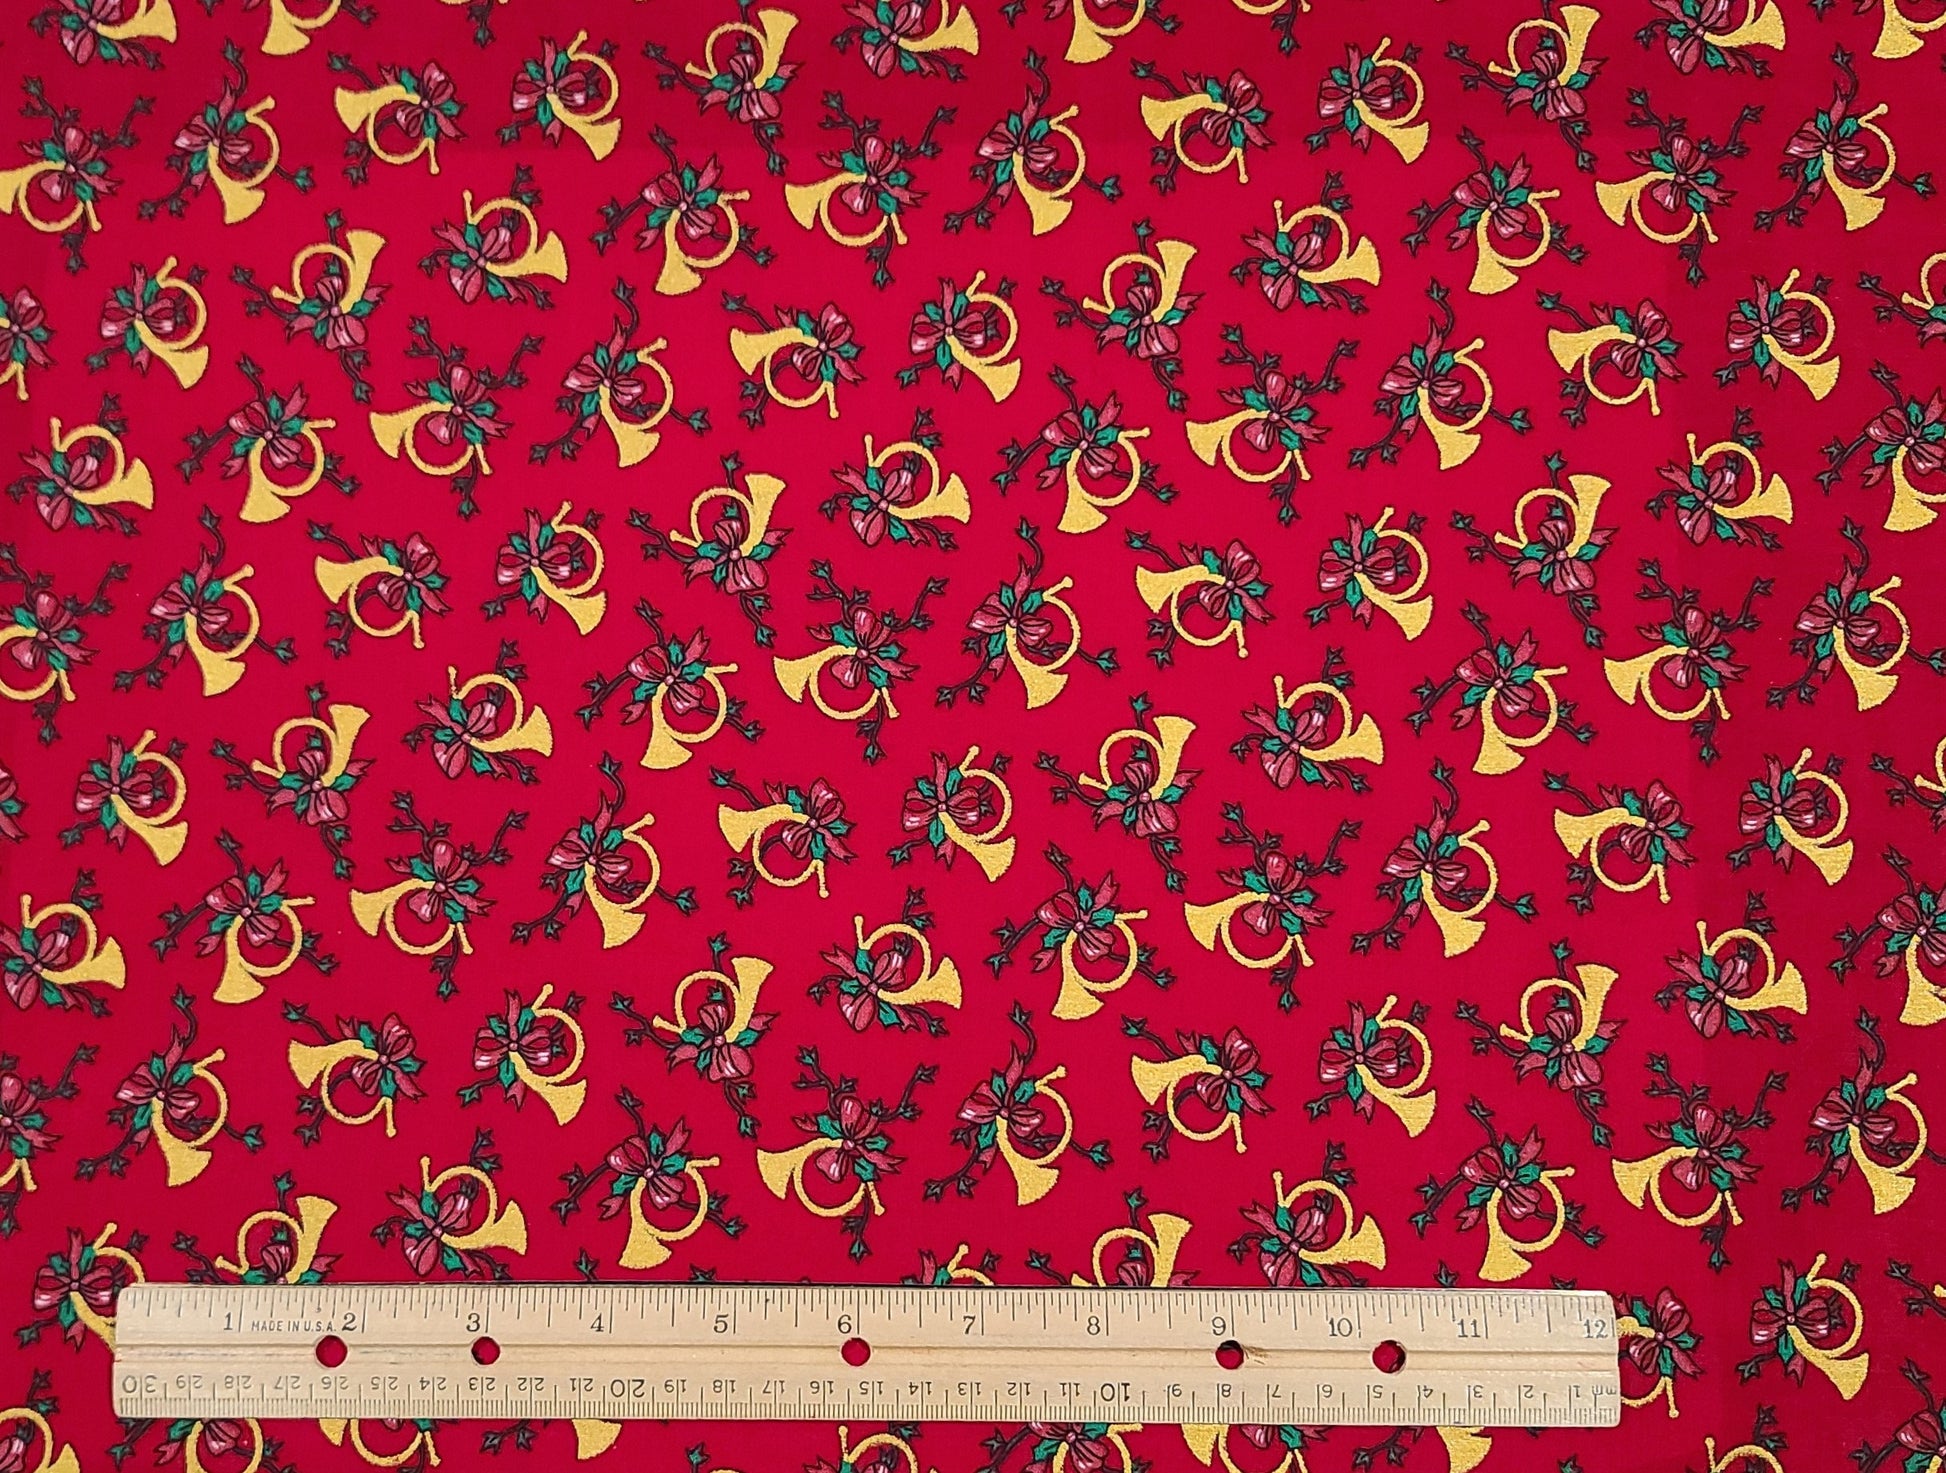 Dark Red Fabric / Pink and White Ribbon, Green Holly Leaves, Gold